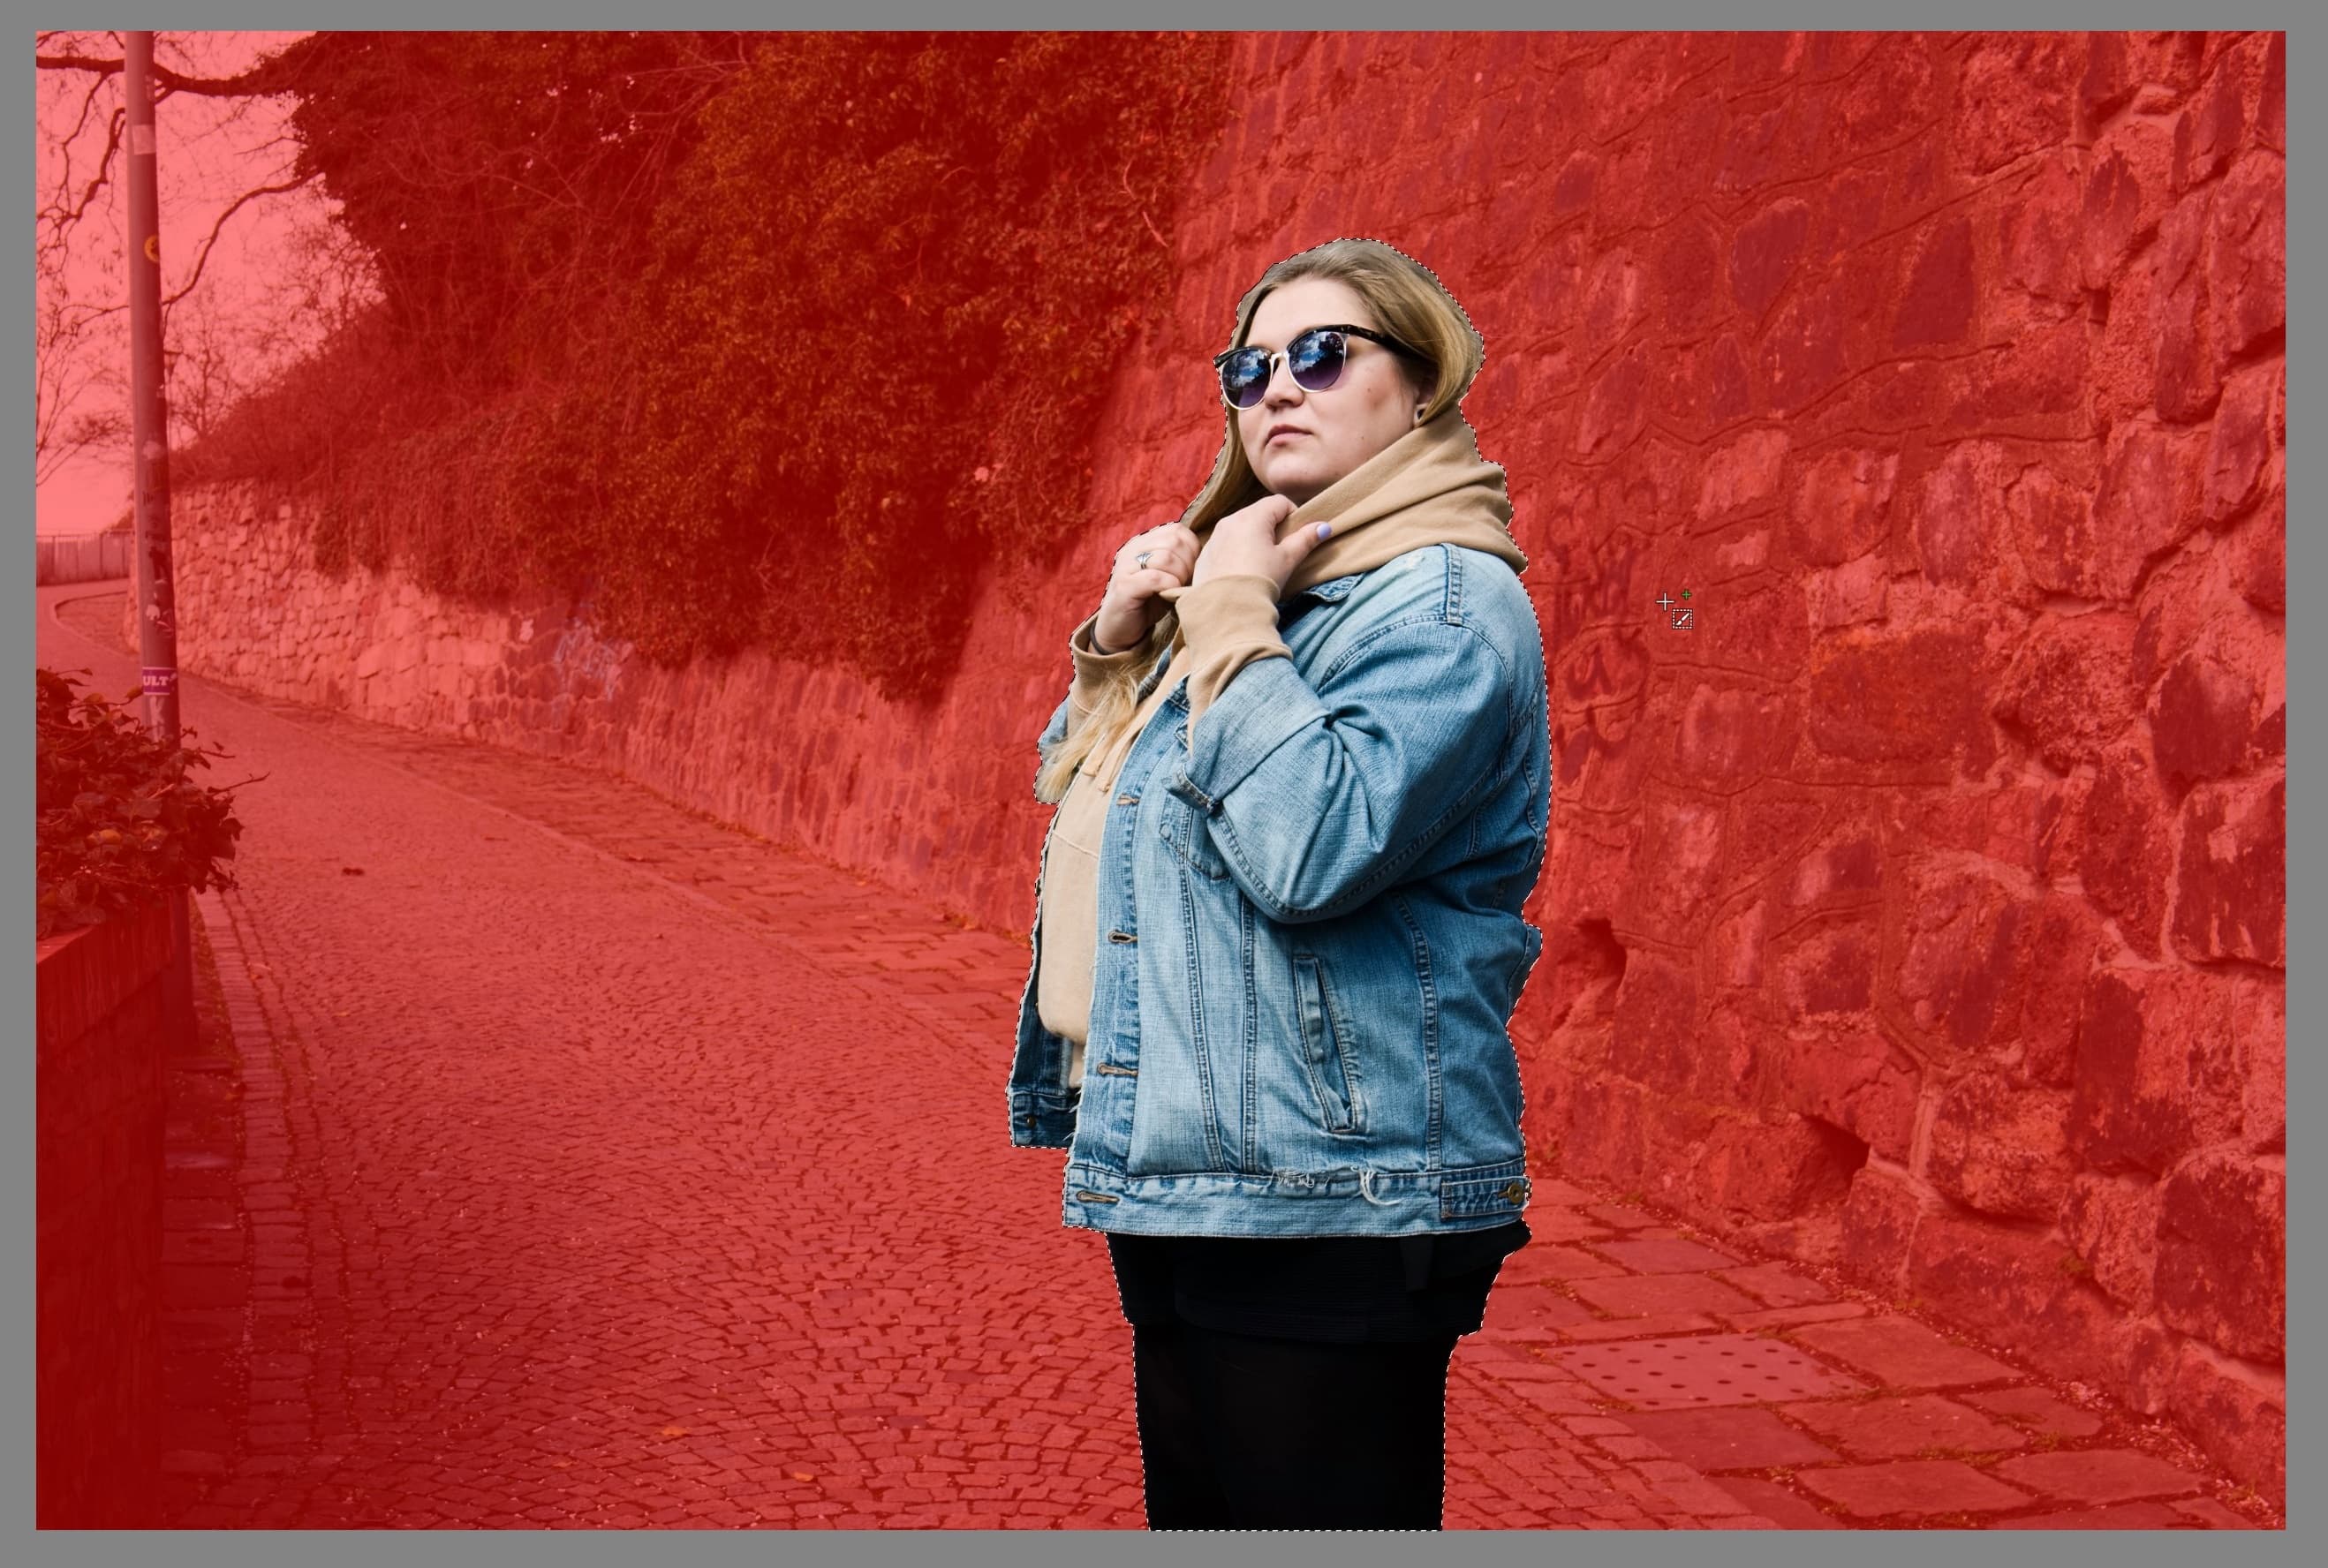 How to Create Blurred Backgrounds for Portraits